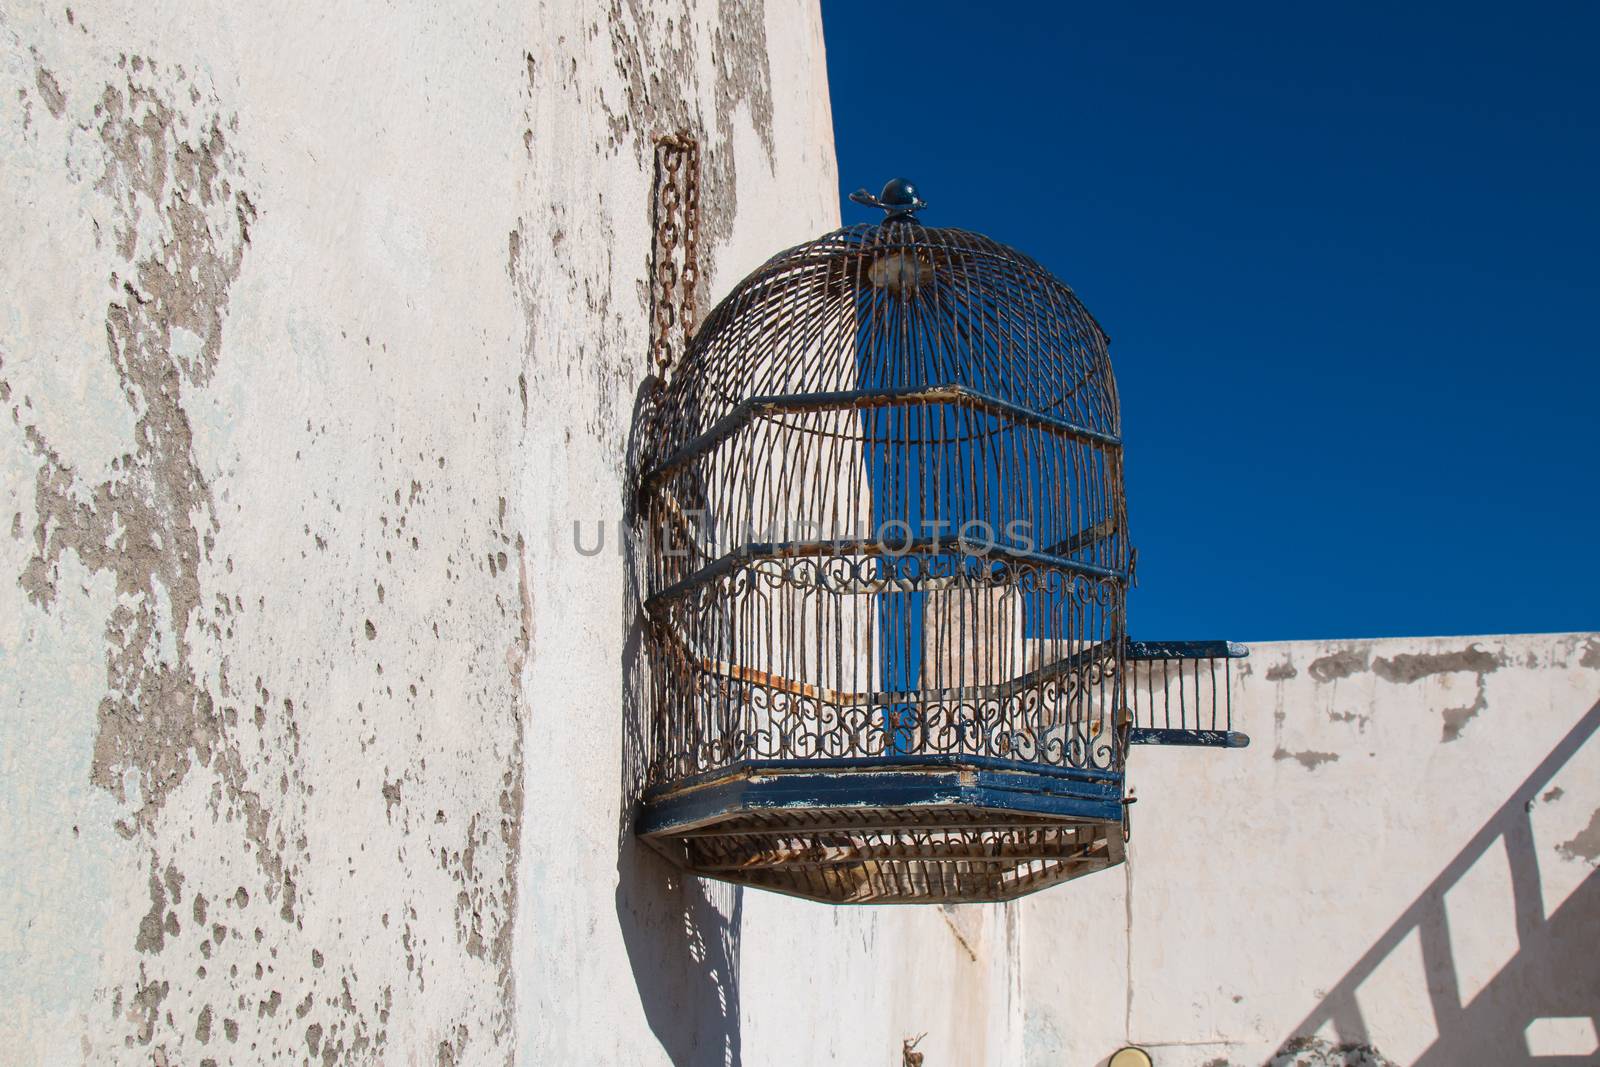 Empty stylish bird cage hanging on the old wall. Bright blue sky.